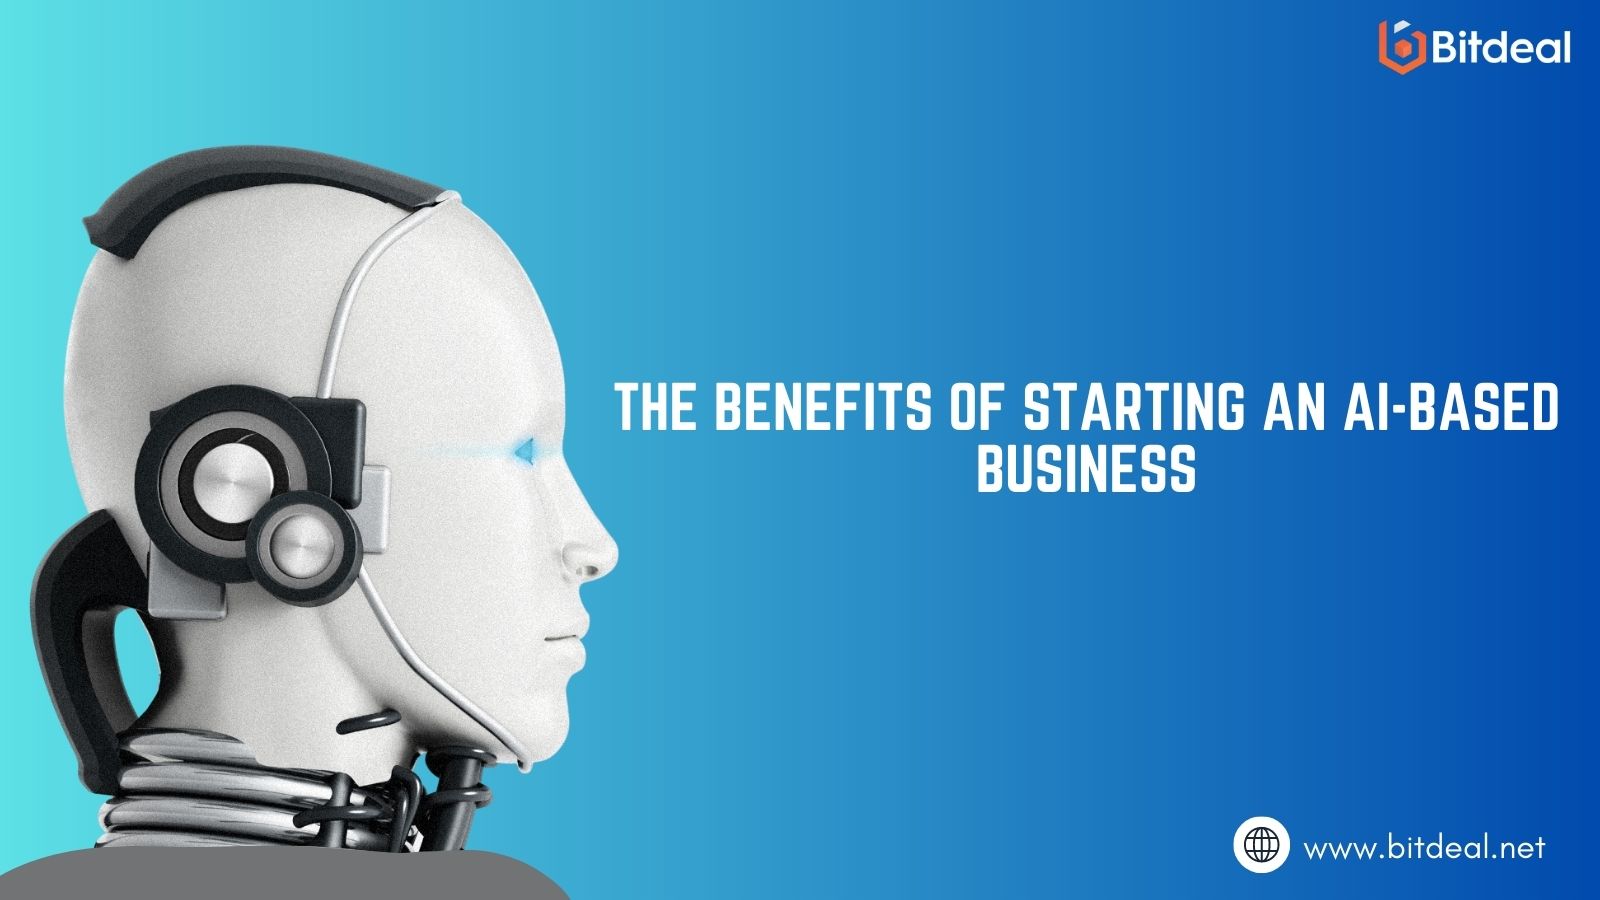 The Benefits of Starting an AI-Based Business